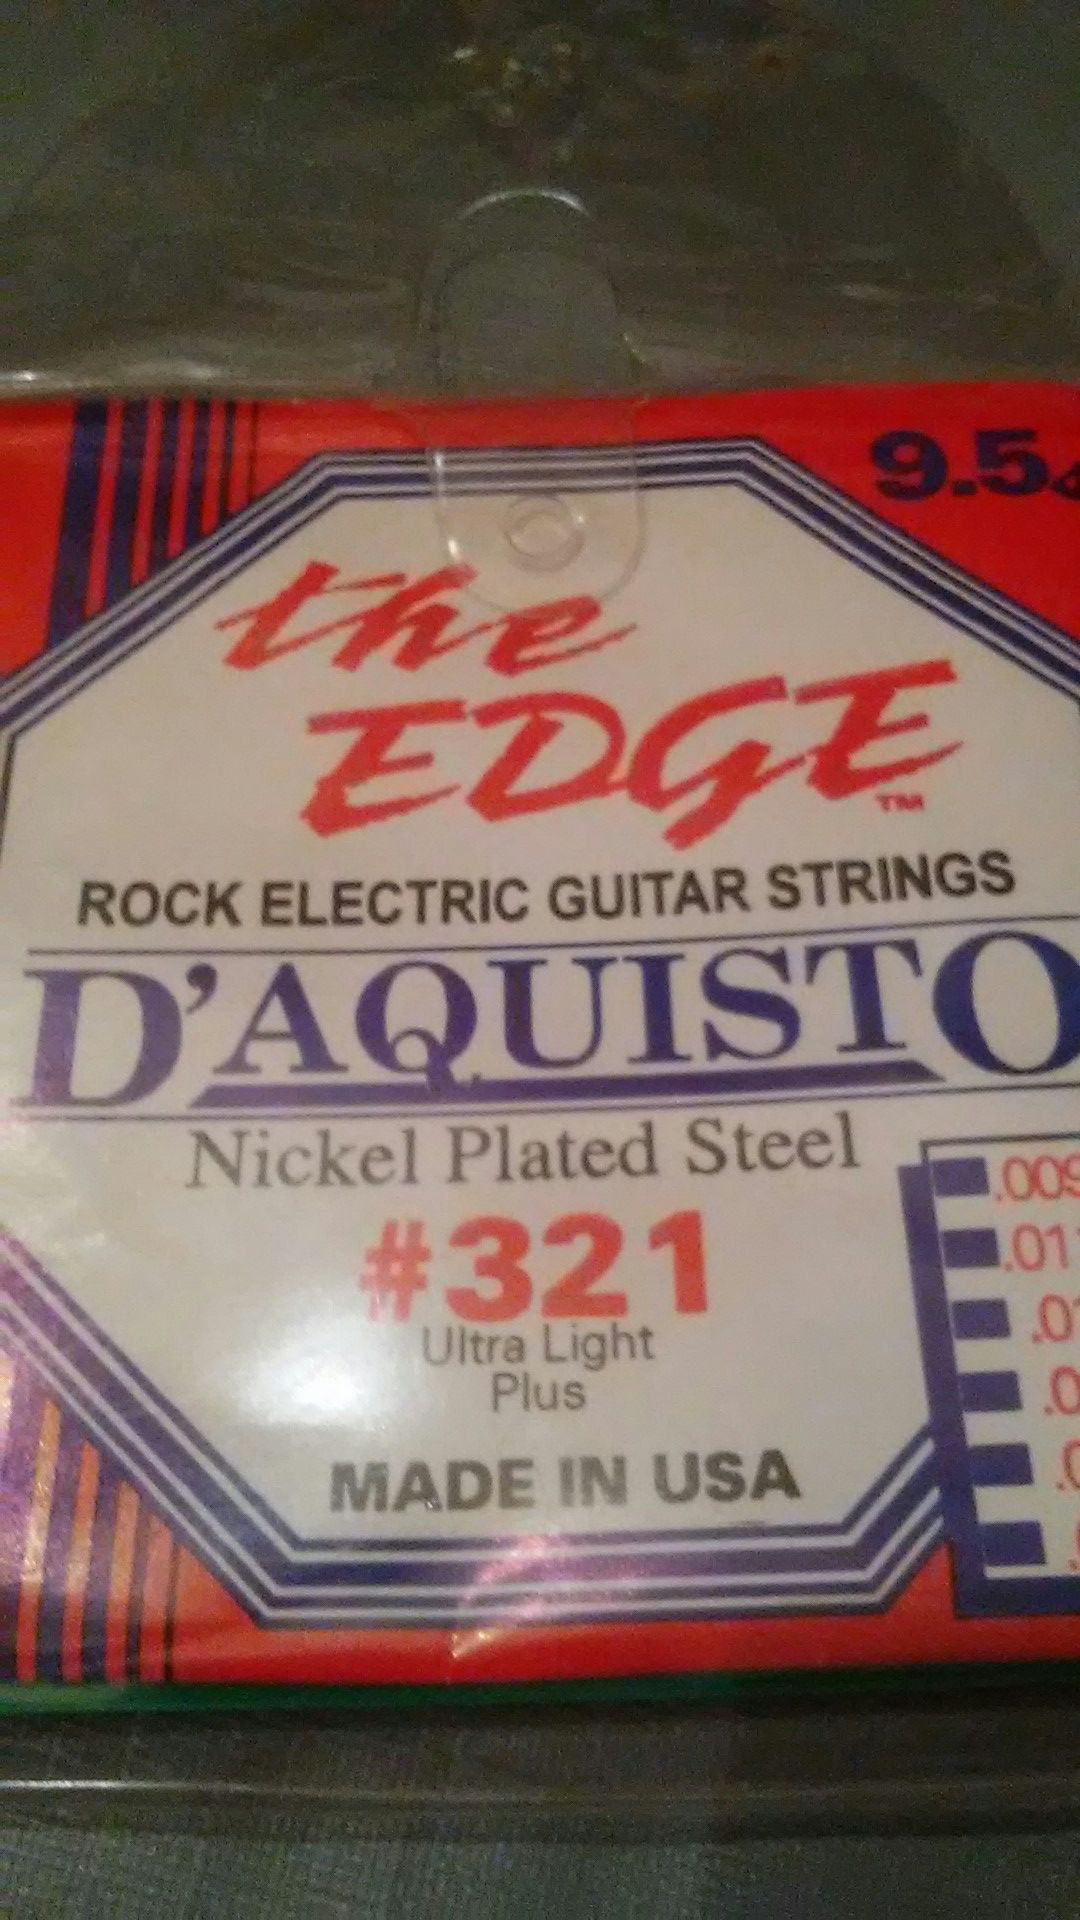 D'Aquisto # 321 NICKEL PLATED GUITAR STRING S